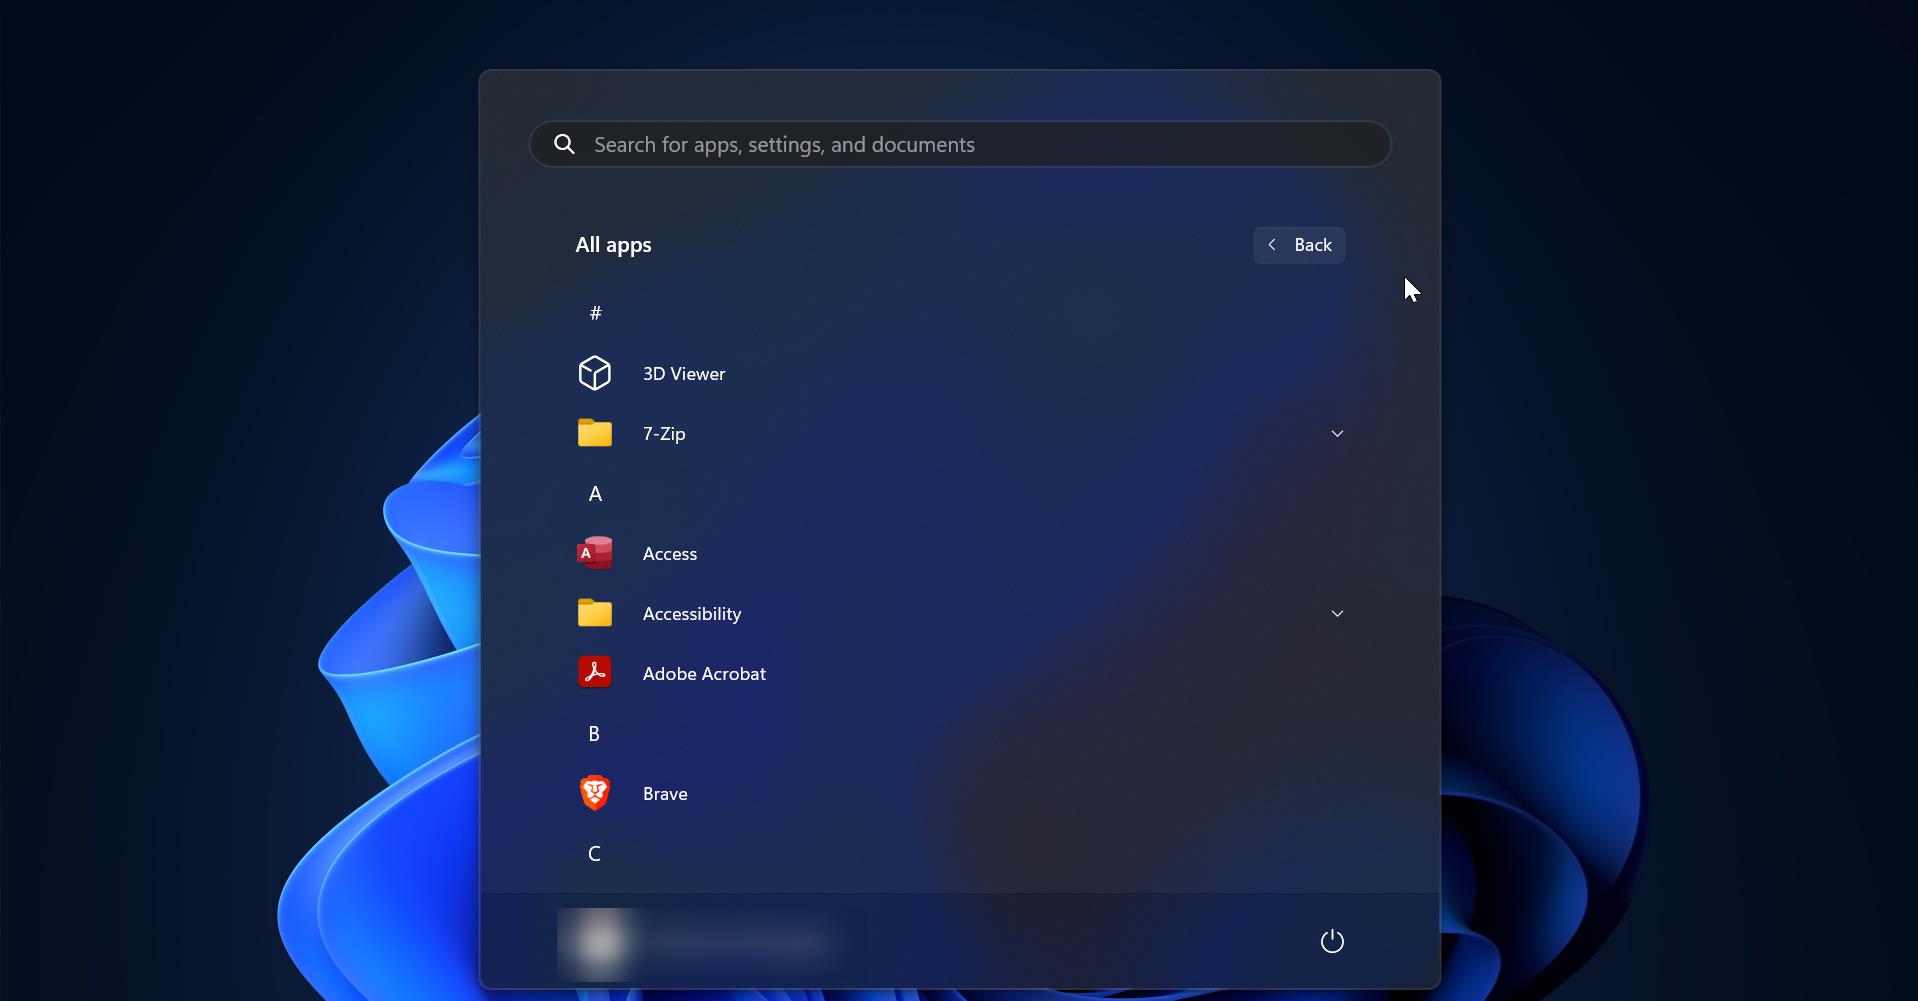 show all apps by default in start menu